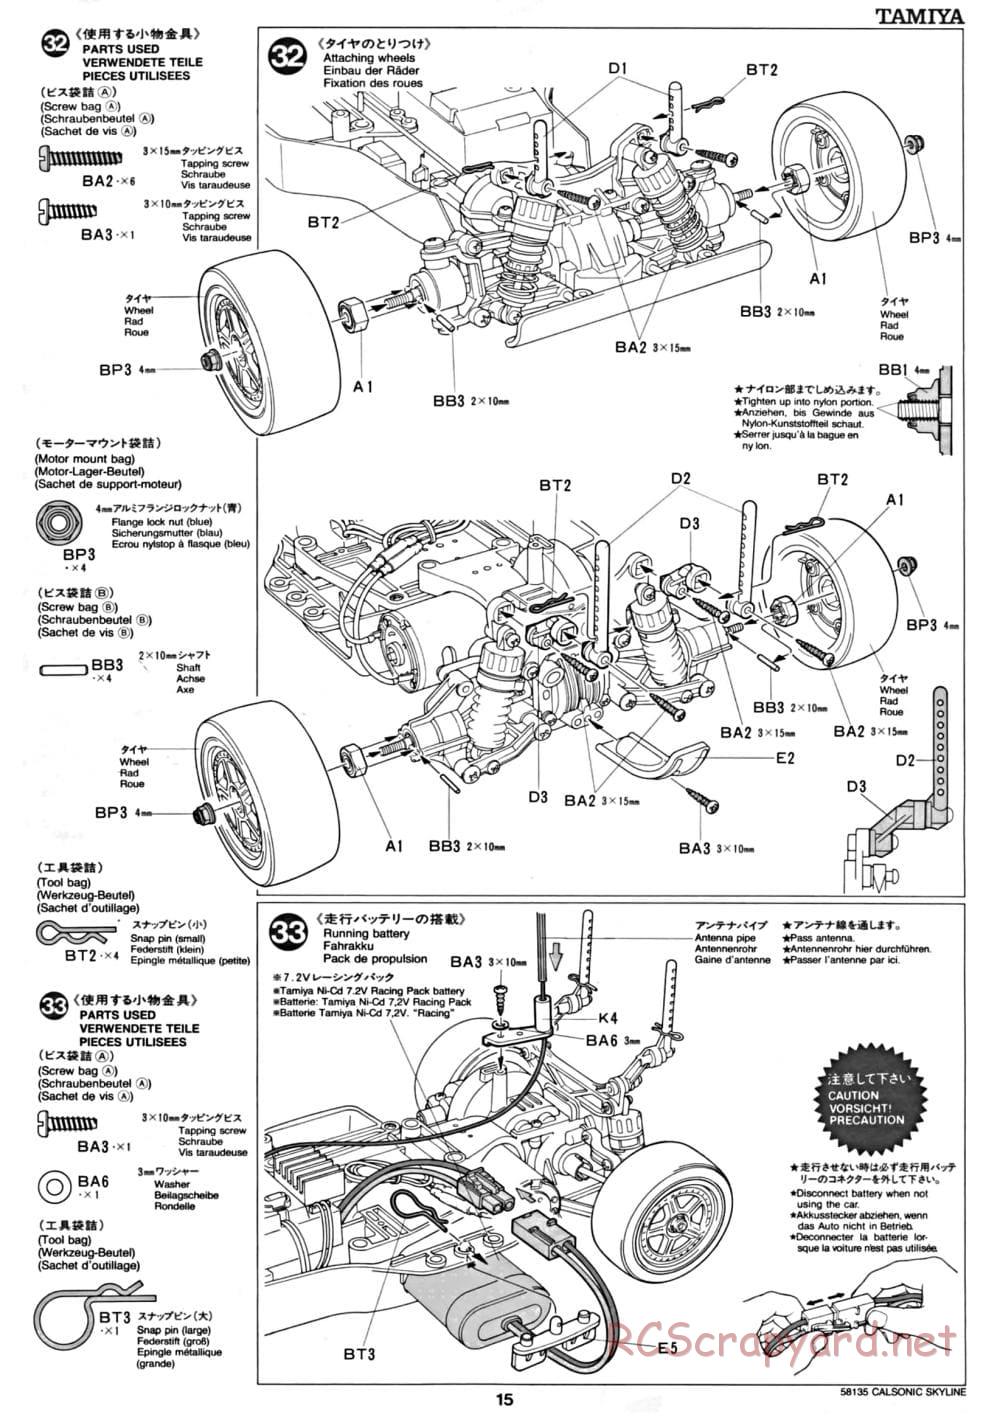 Tamiya - Calsonic Skyline GT-R Gr.A - TA-02 Chassis - Manual - Page 15